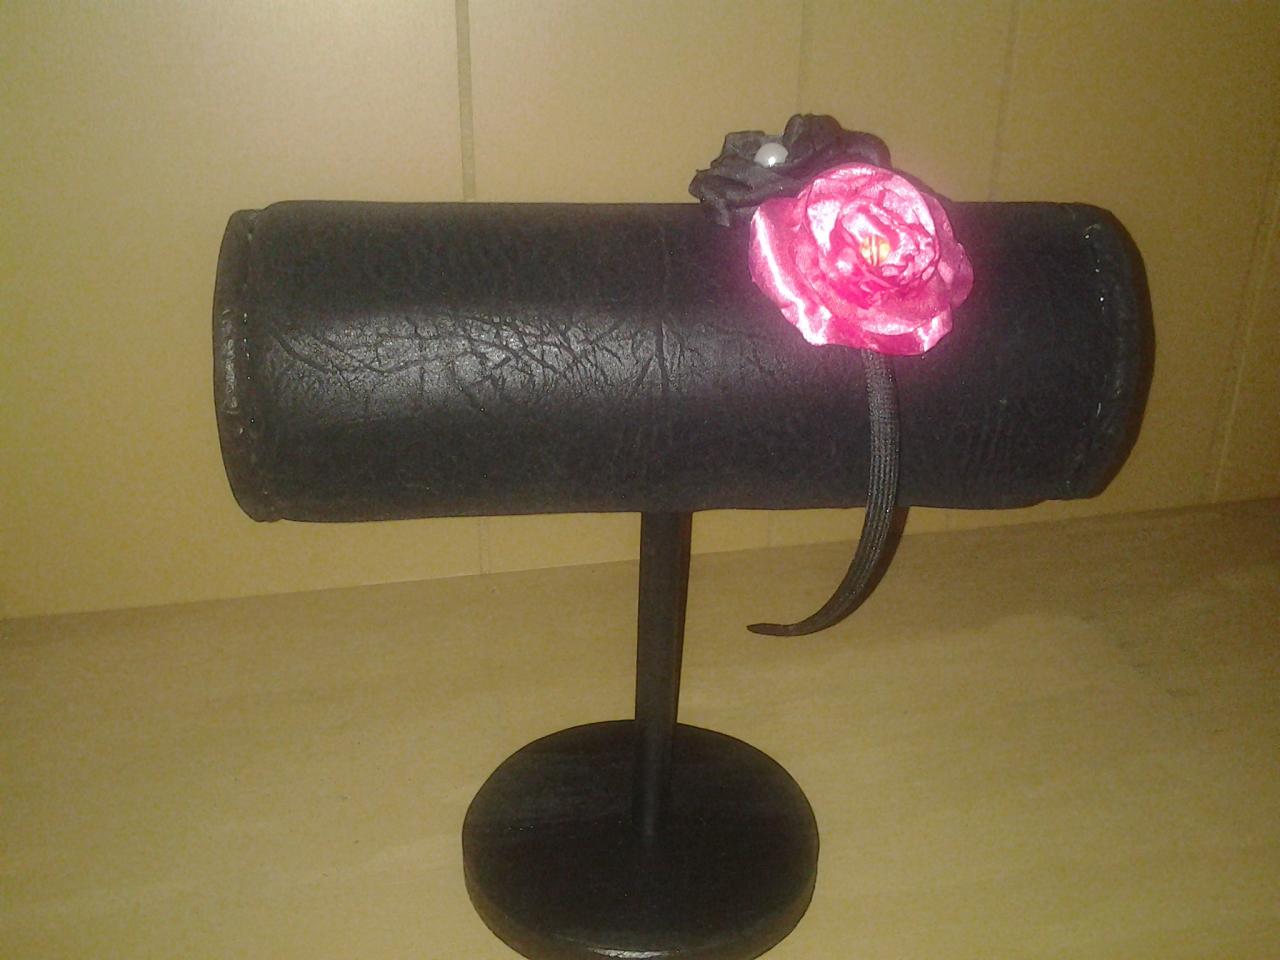 Boutique Headband Display Black Leatherette With Wood Stand. Craft Show Designs Great Bedroom Decor, Photo Prop, Booth Displays,holder,